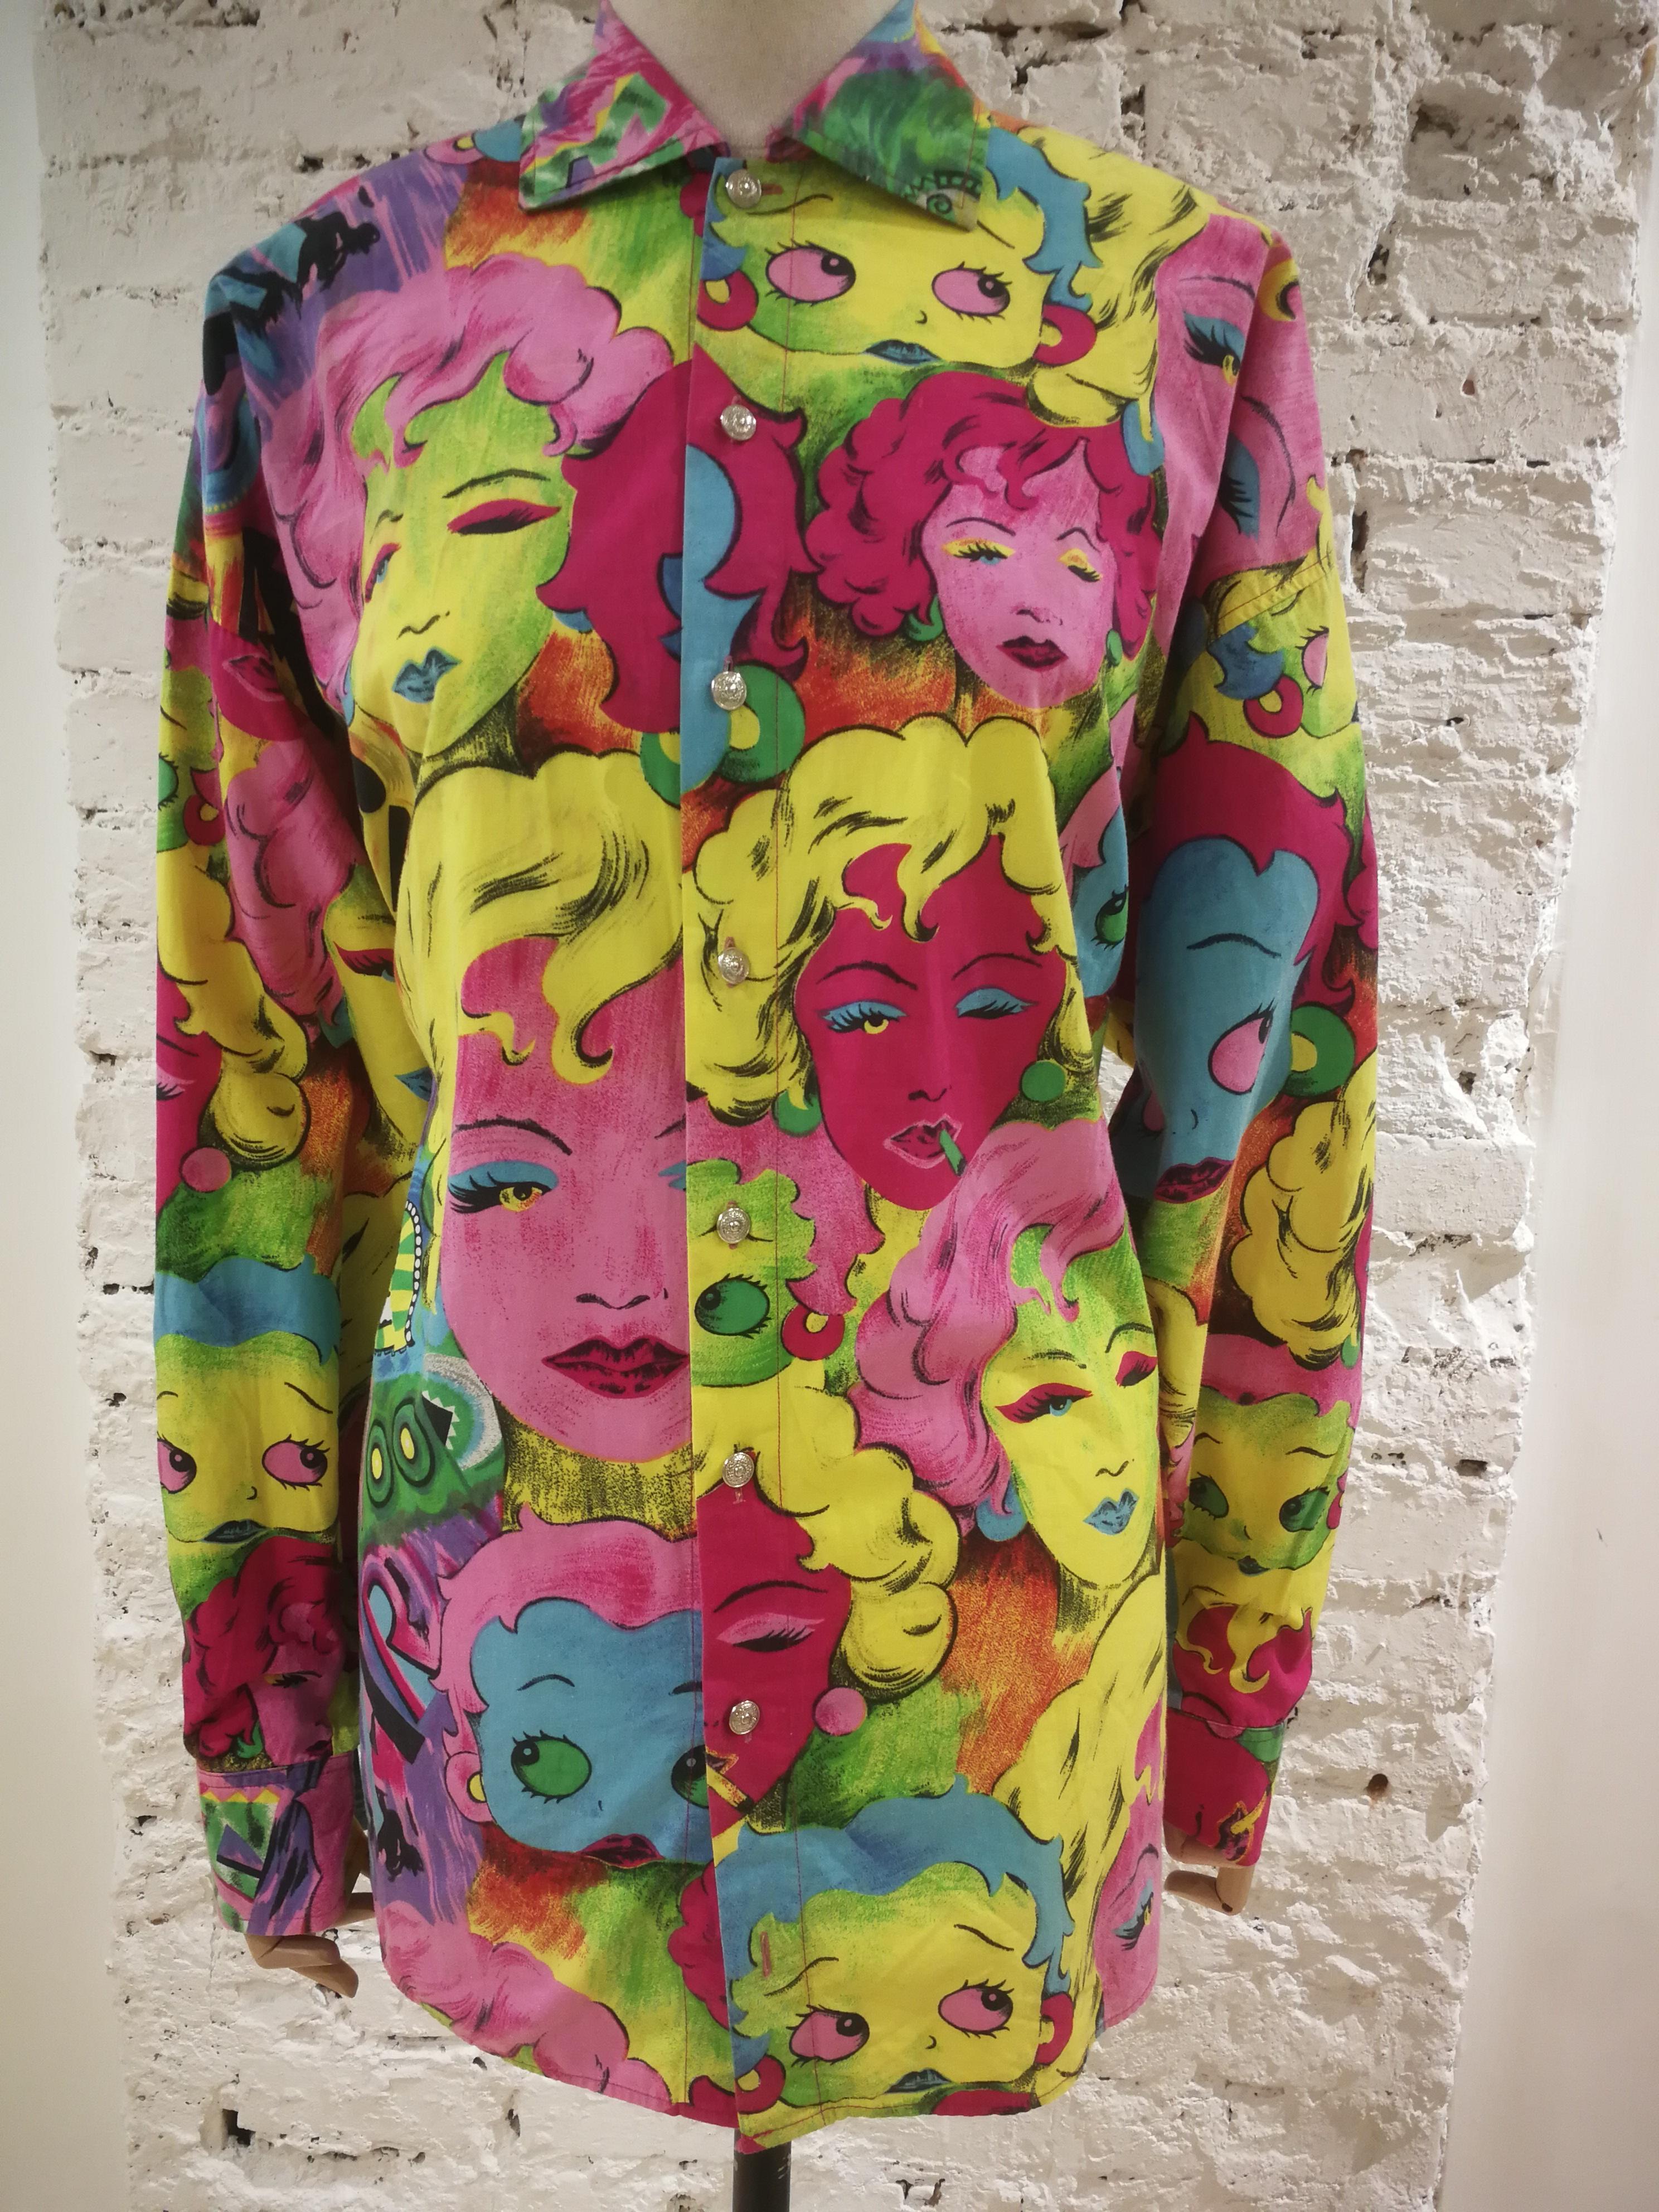 1993 Versace Marilyn Monroe Betty Boop Shirt
Rare and iconic shirt from Versace
totally made in italy in siz eM 
Composition: Cotton